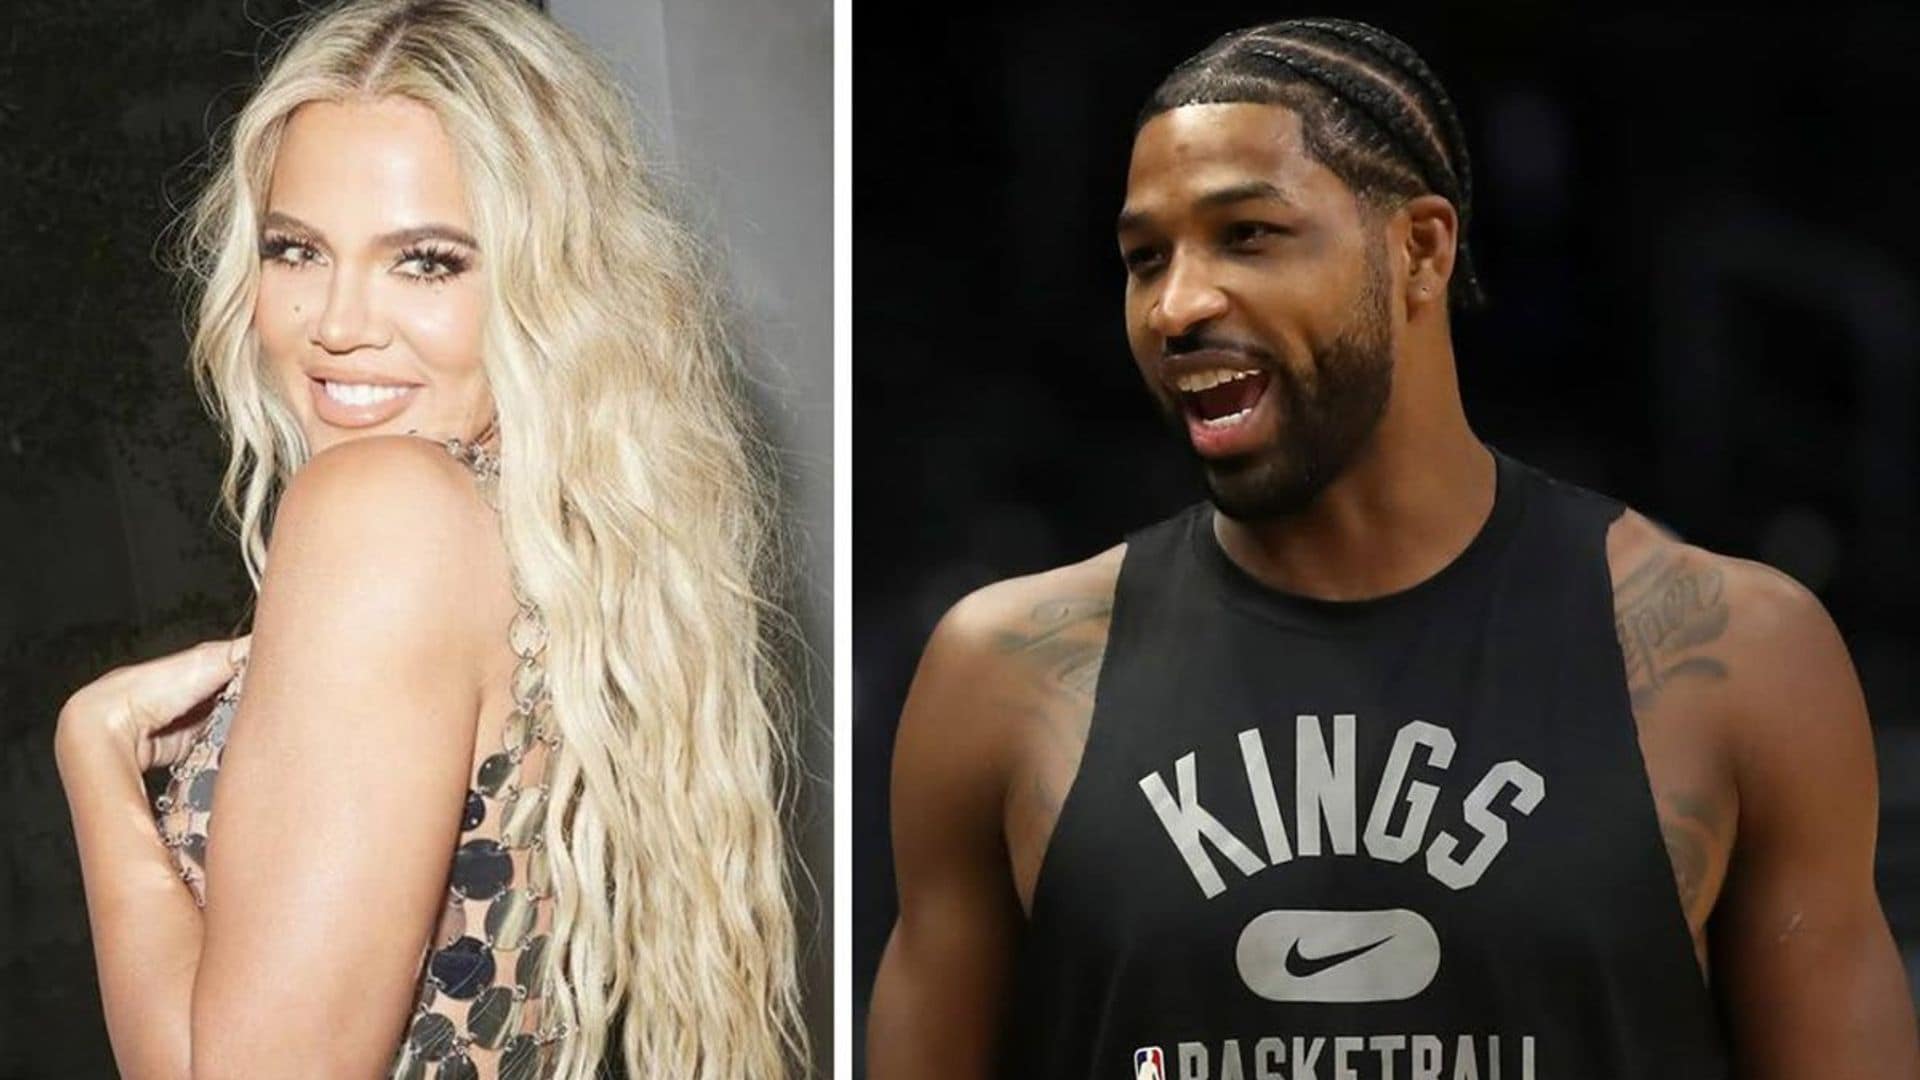 Khloé Kardashian is ‘moving on’ from Tristan Thompson amid paternity lawsuit drama